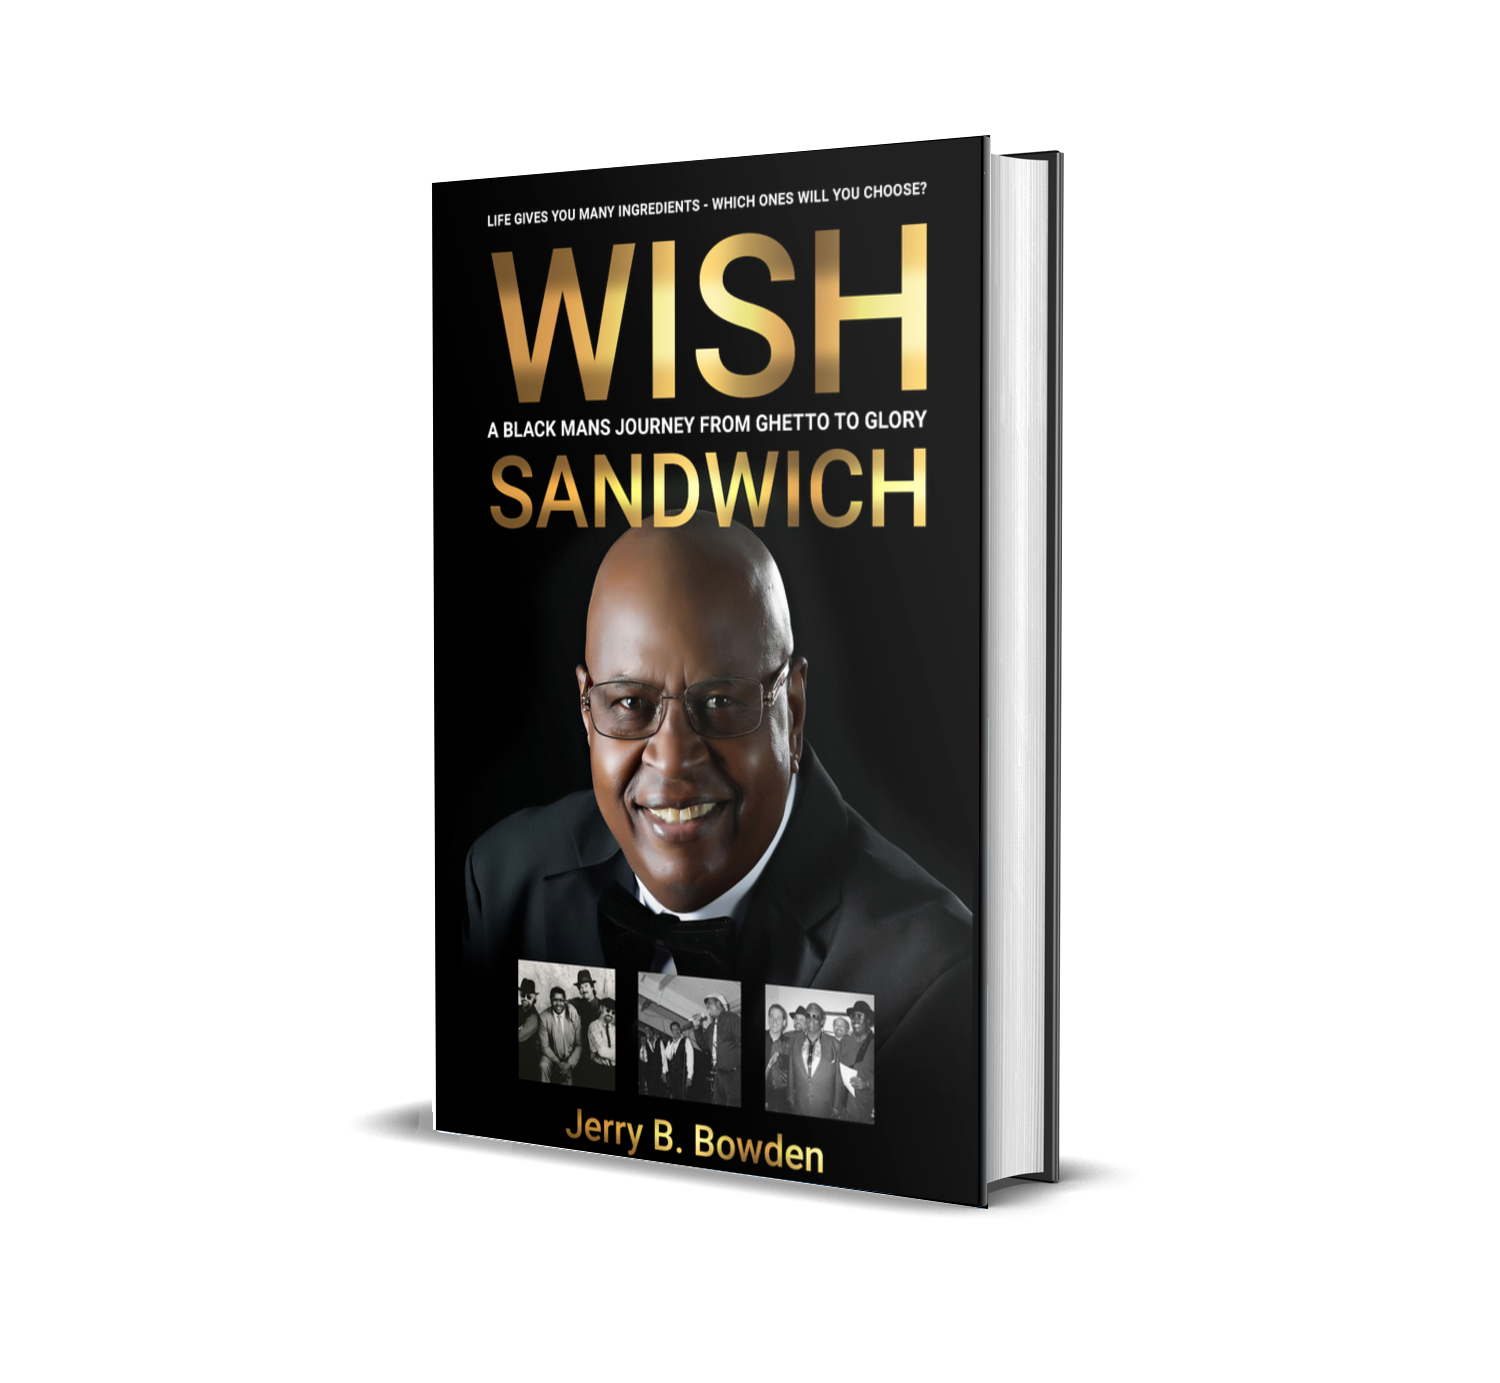 image of Jerry B. Bowden's book titled, Wish Sandwich, a black man's journey from ghetto to glory